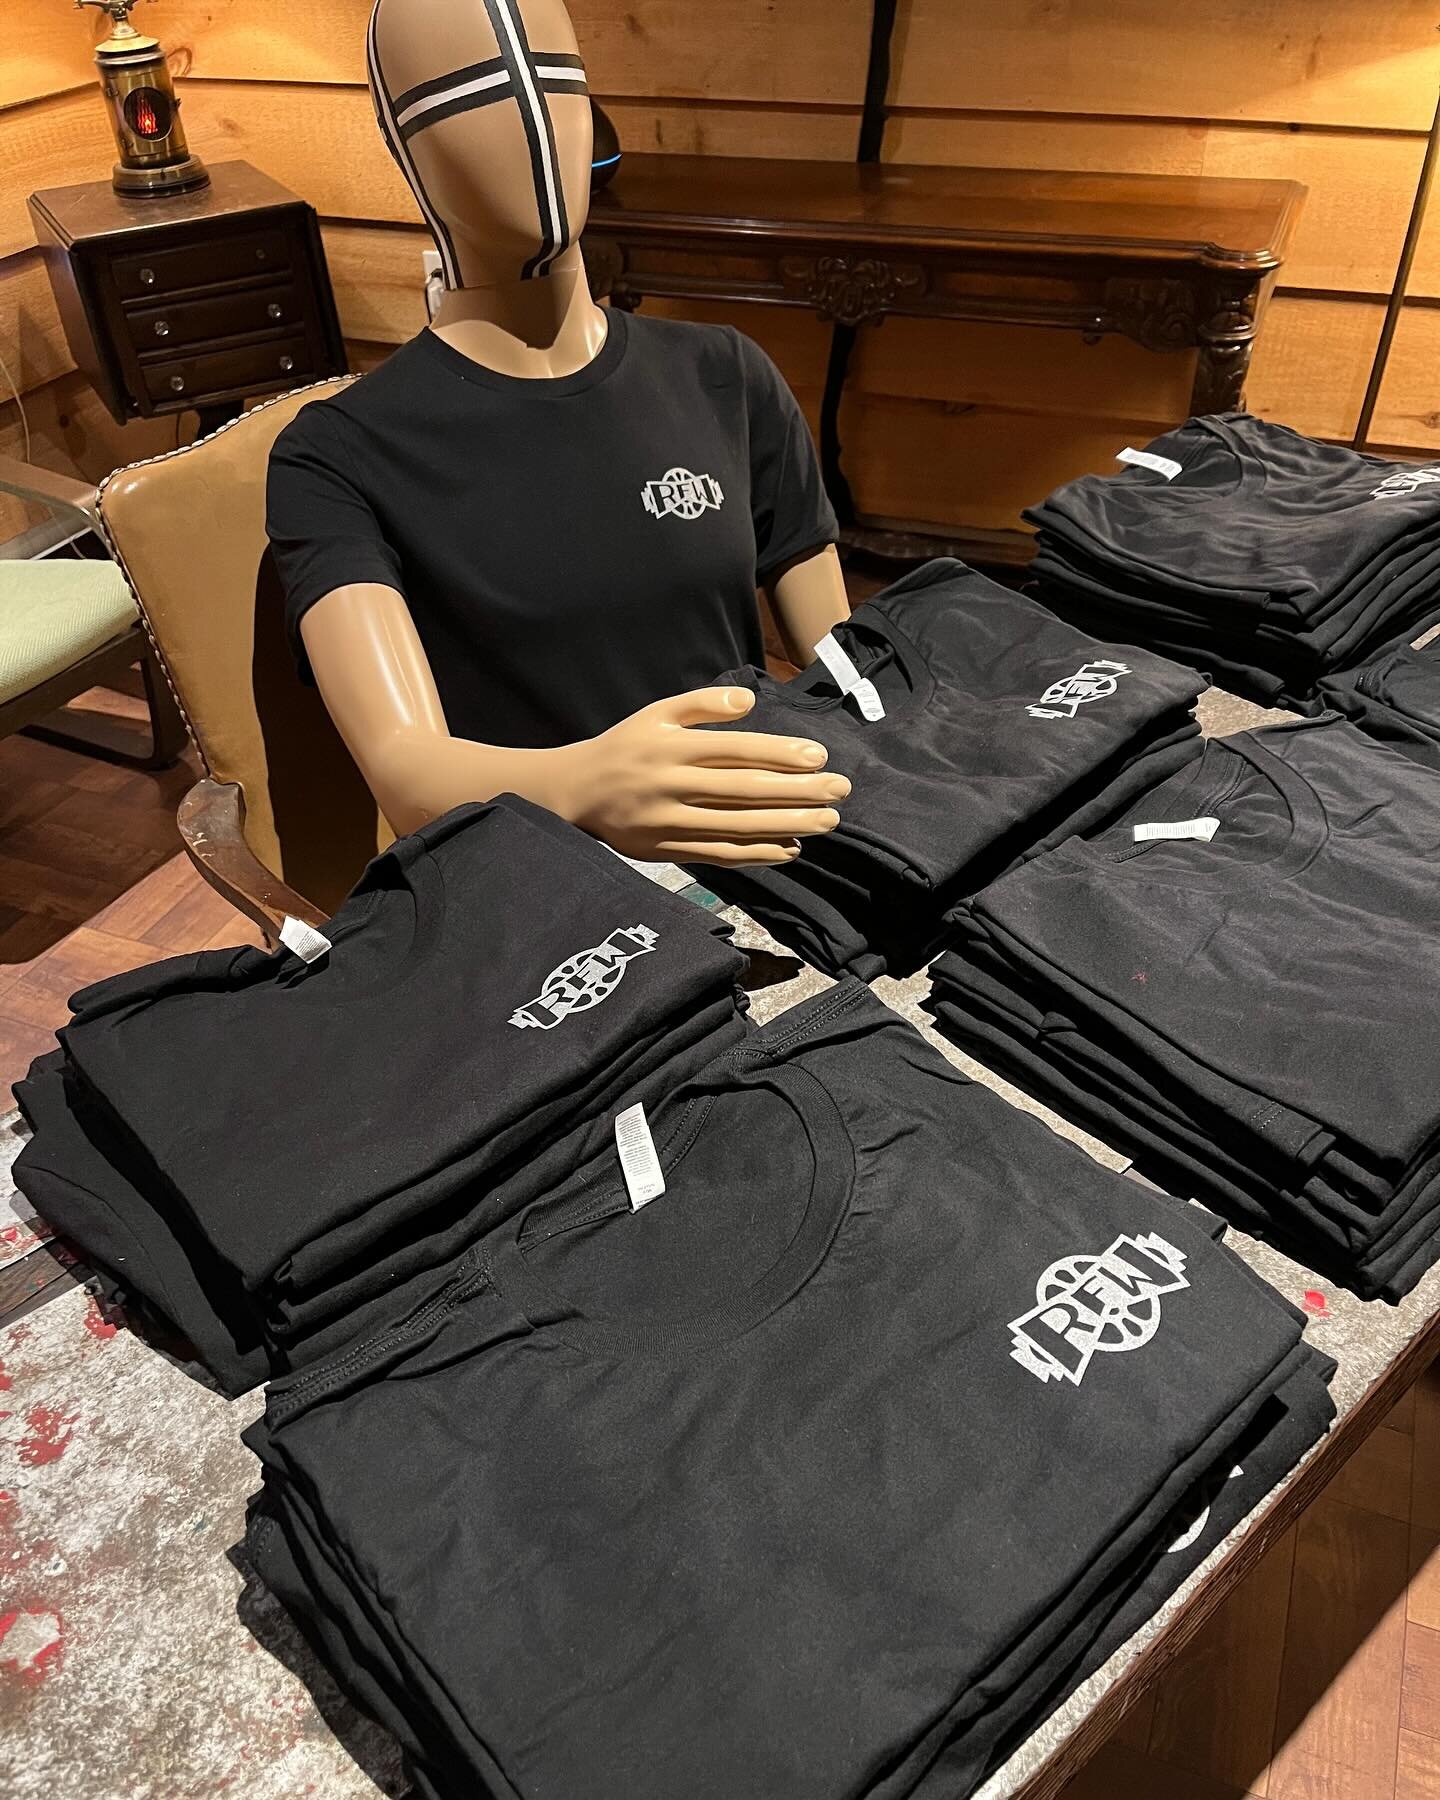 Be sure to snag one of our comfy T-shirts the next time you&rsquo;re in the studio. Stan Din will be delighted to lend a helping hand 🤚 

#shotatrittenhouse #rfw #rittenhousefilmworks #soundstage #studio #stuidolife #phillyfilm #phillyfilmmaker #ind